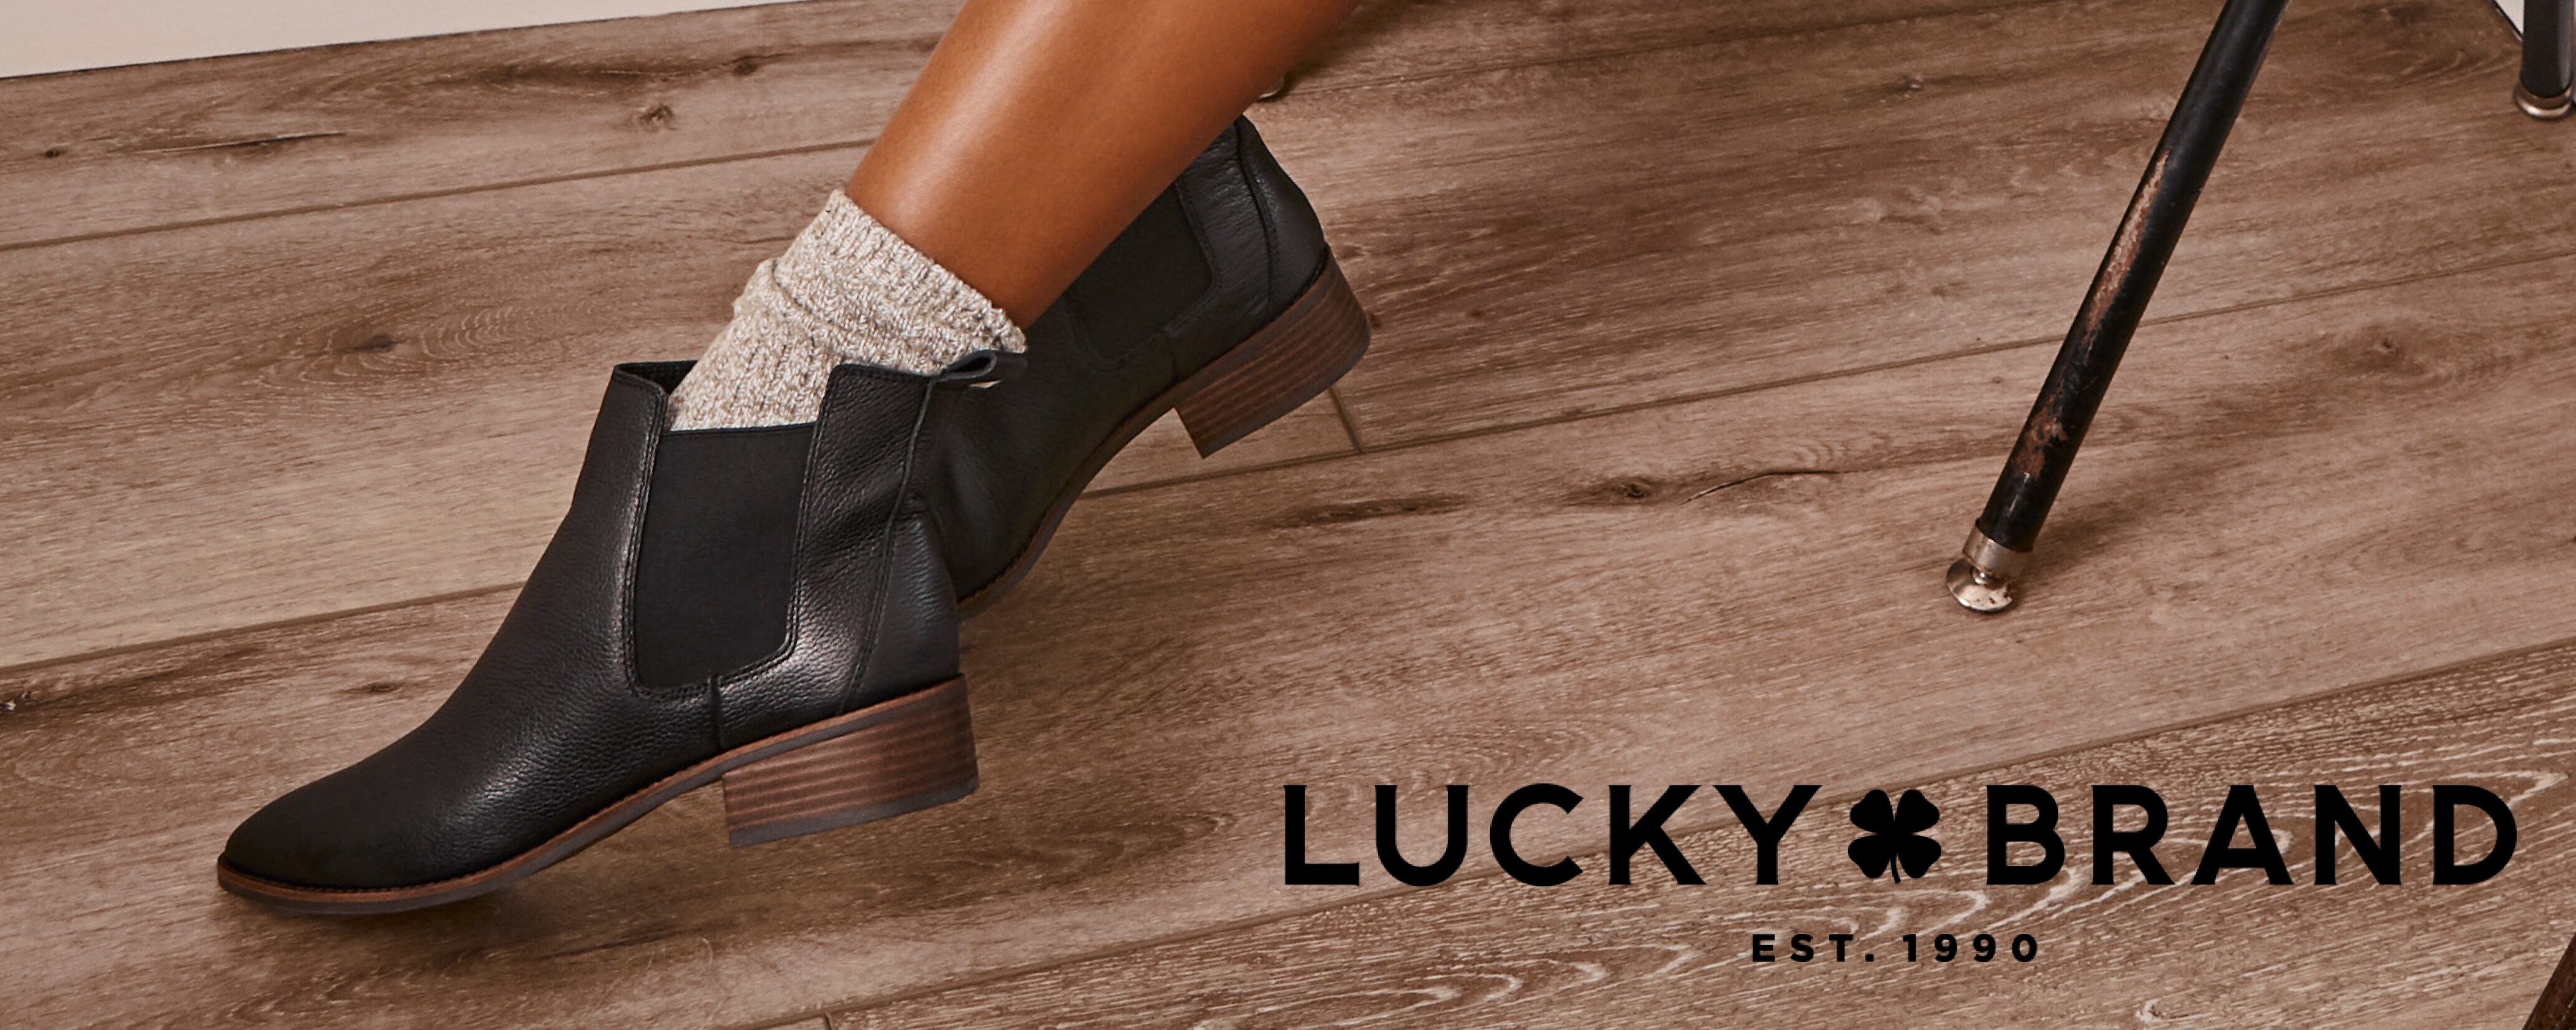 dsw shoes lucky brand